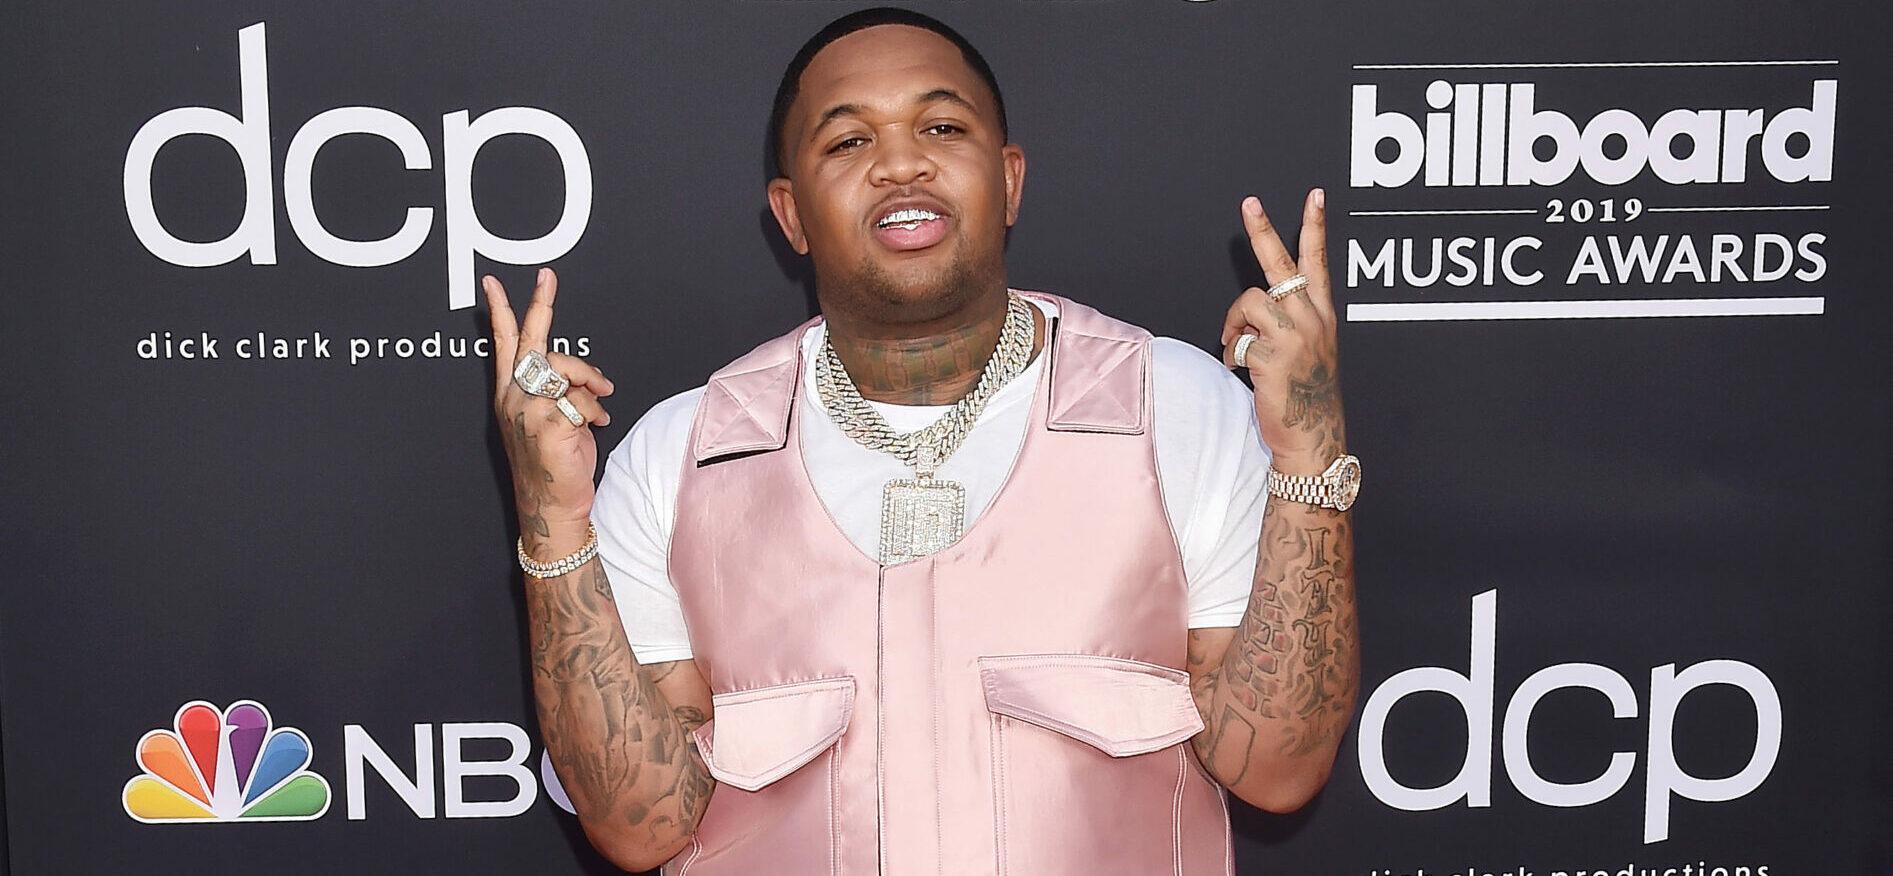 DJ Mustard To Ex-Wife: I Pay For Everything...Including Your Lambo! Now, Stop Harassing Me Online